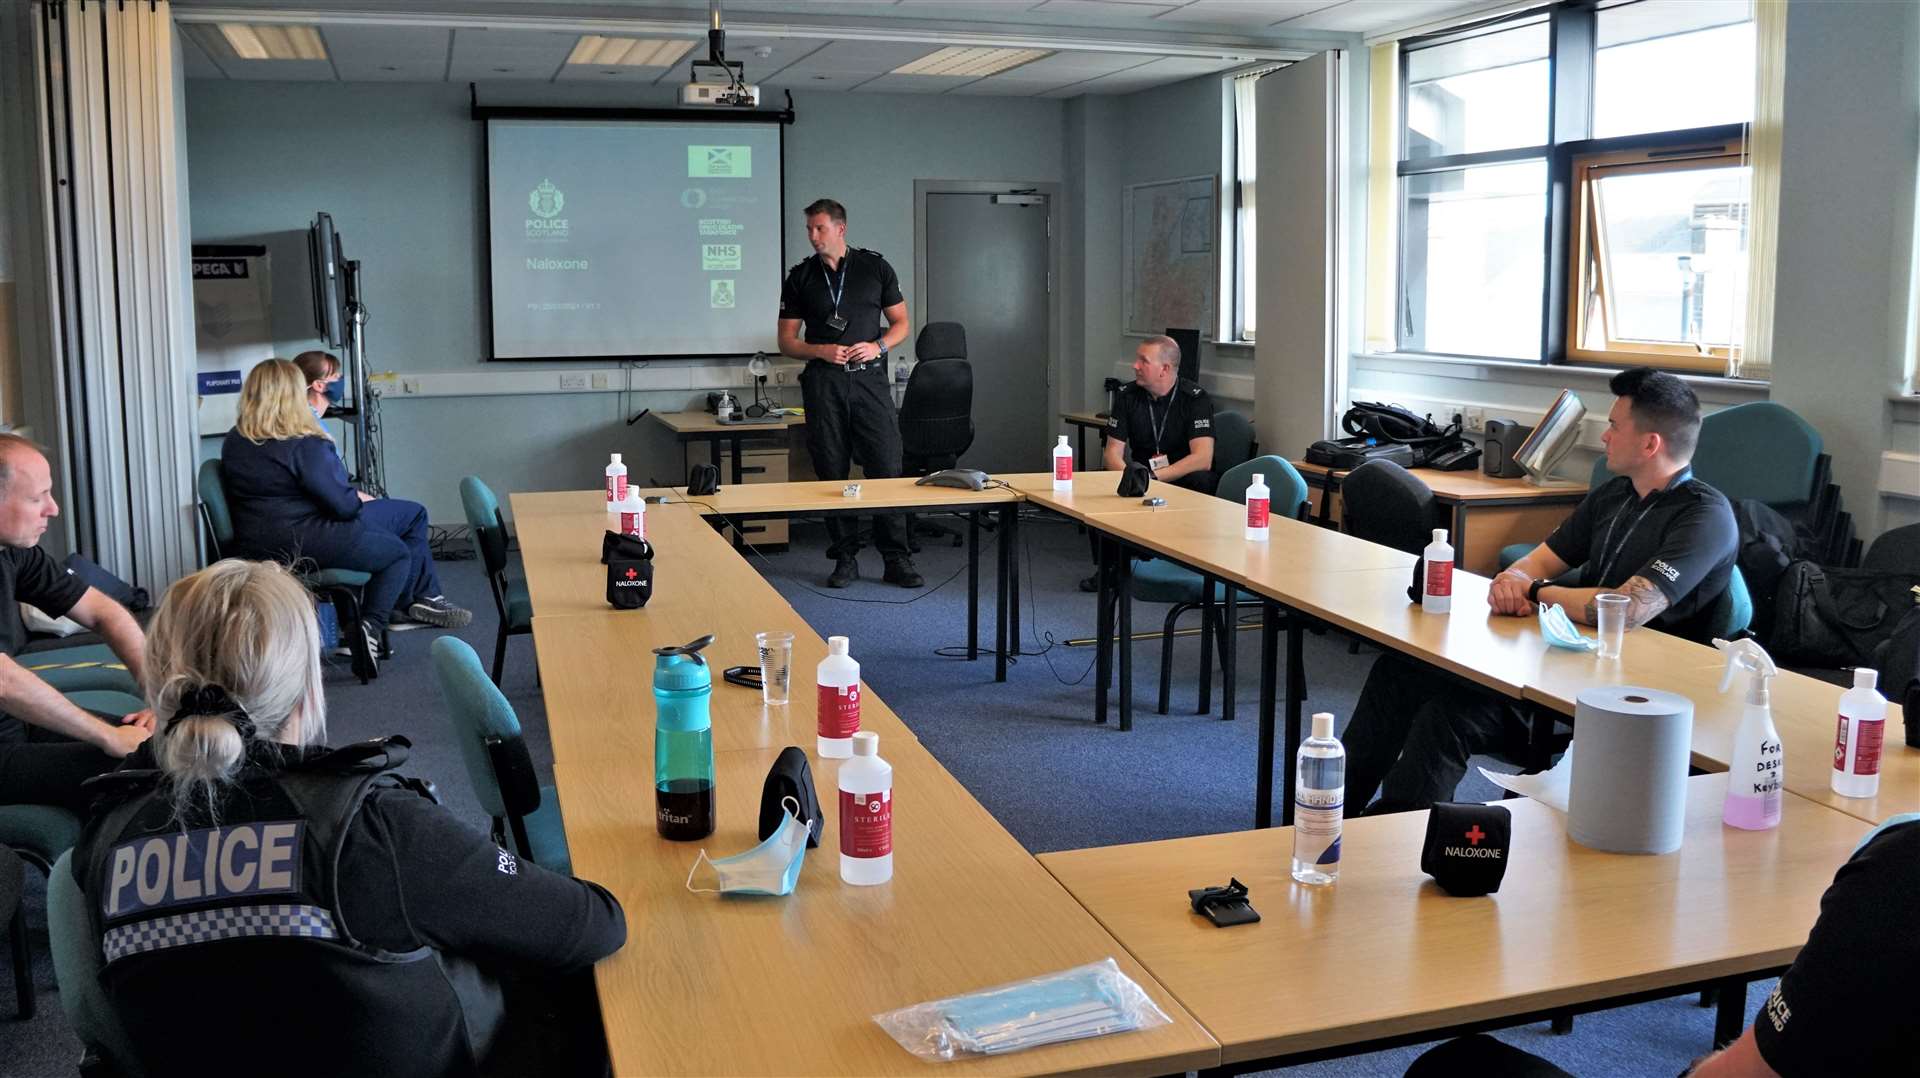 Officers and drug specialists in the conference room of Wick police station for the Naloxone training session on Monday afternoon.